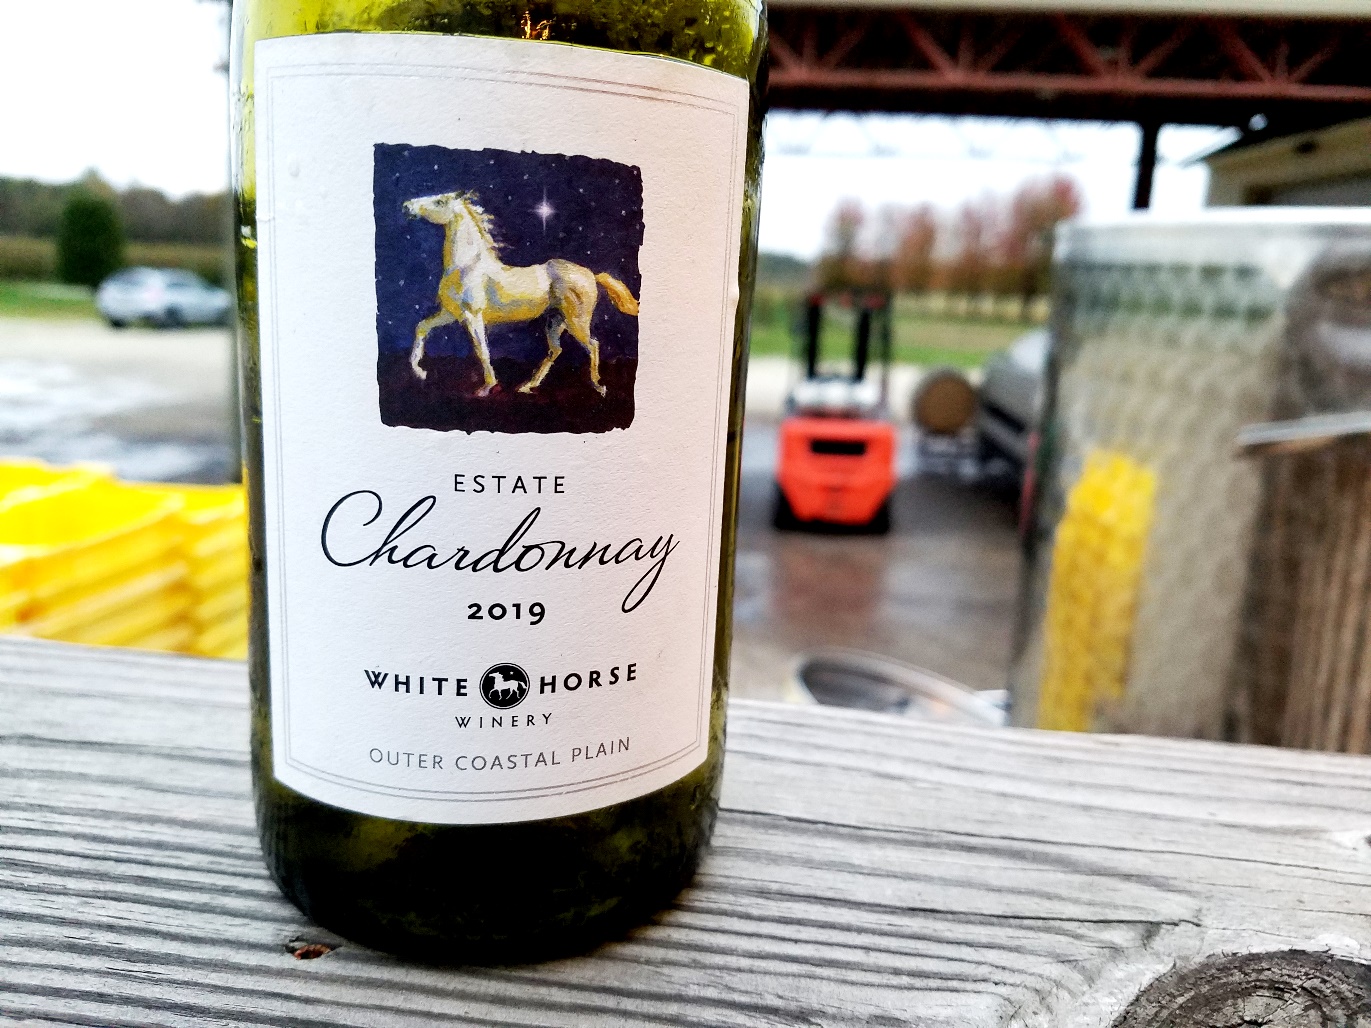 White Horse Winery, Estate Chardonnay 2019, Outer Coastal Plain, New Jersey, Wine Casual